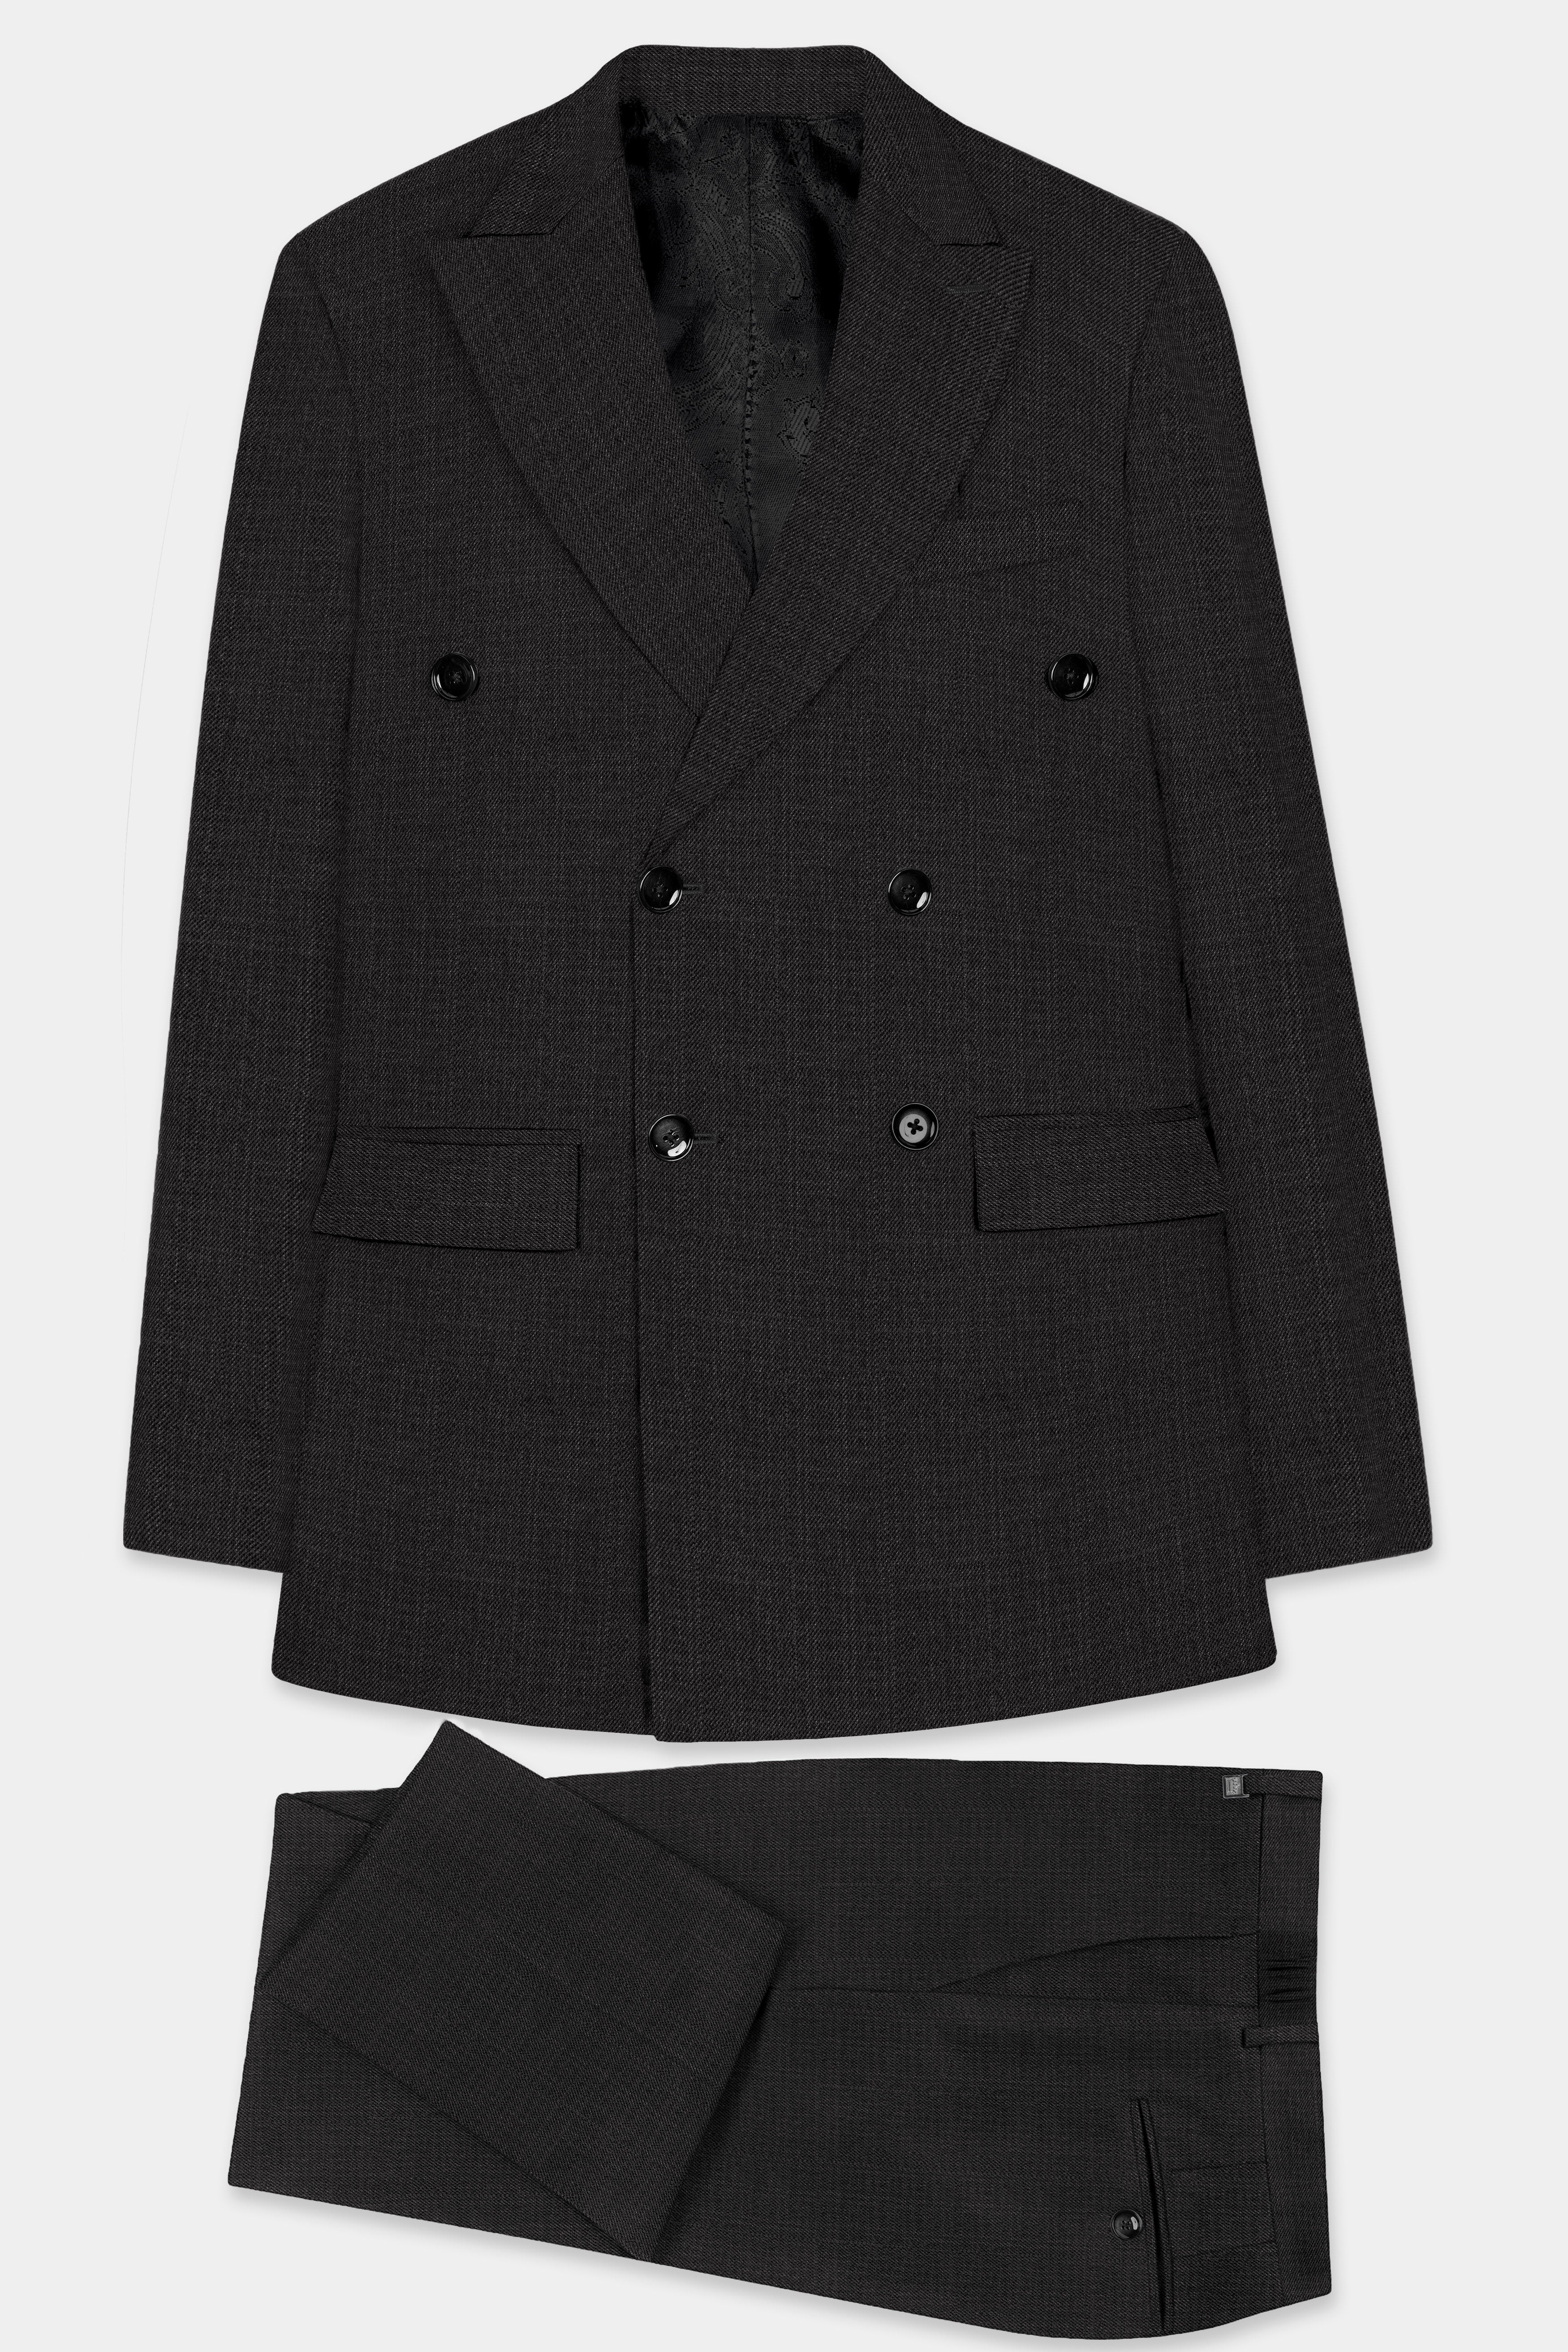 Zeus Gray Textured Wool Rich Double Breasted Suit